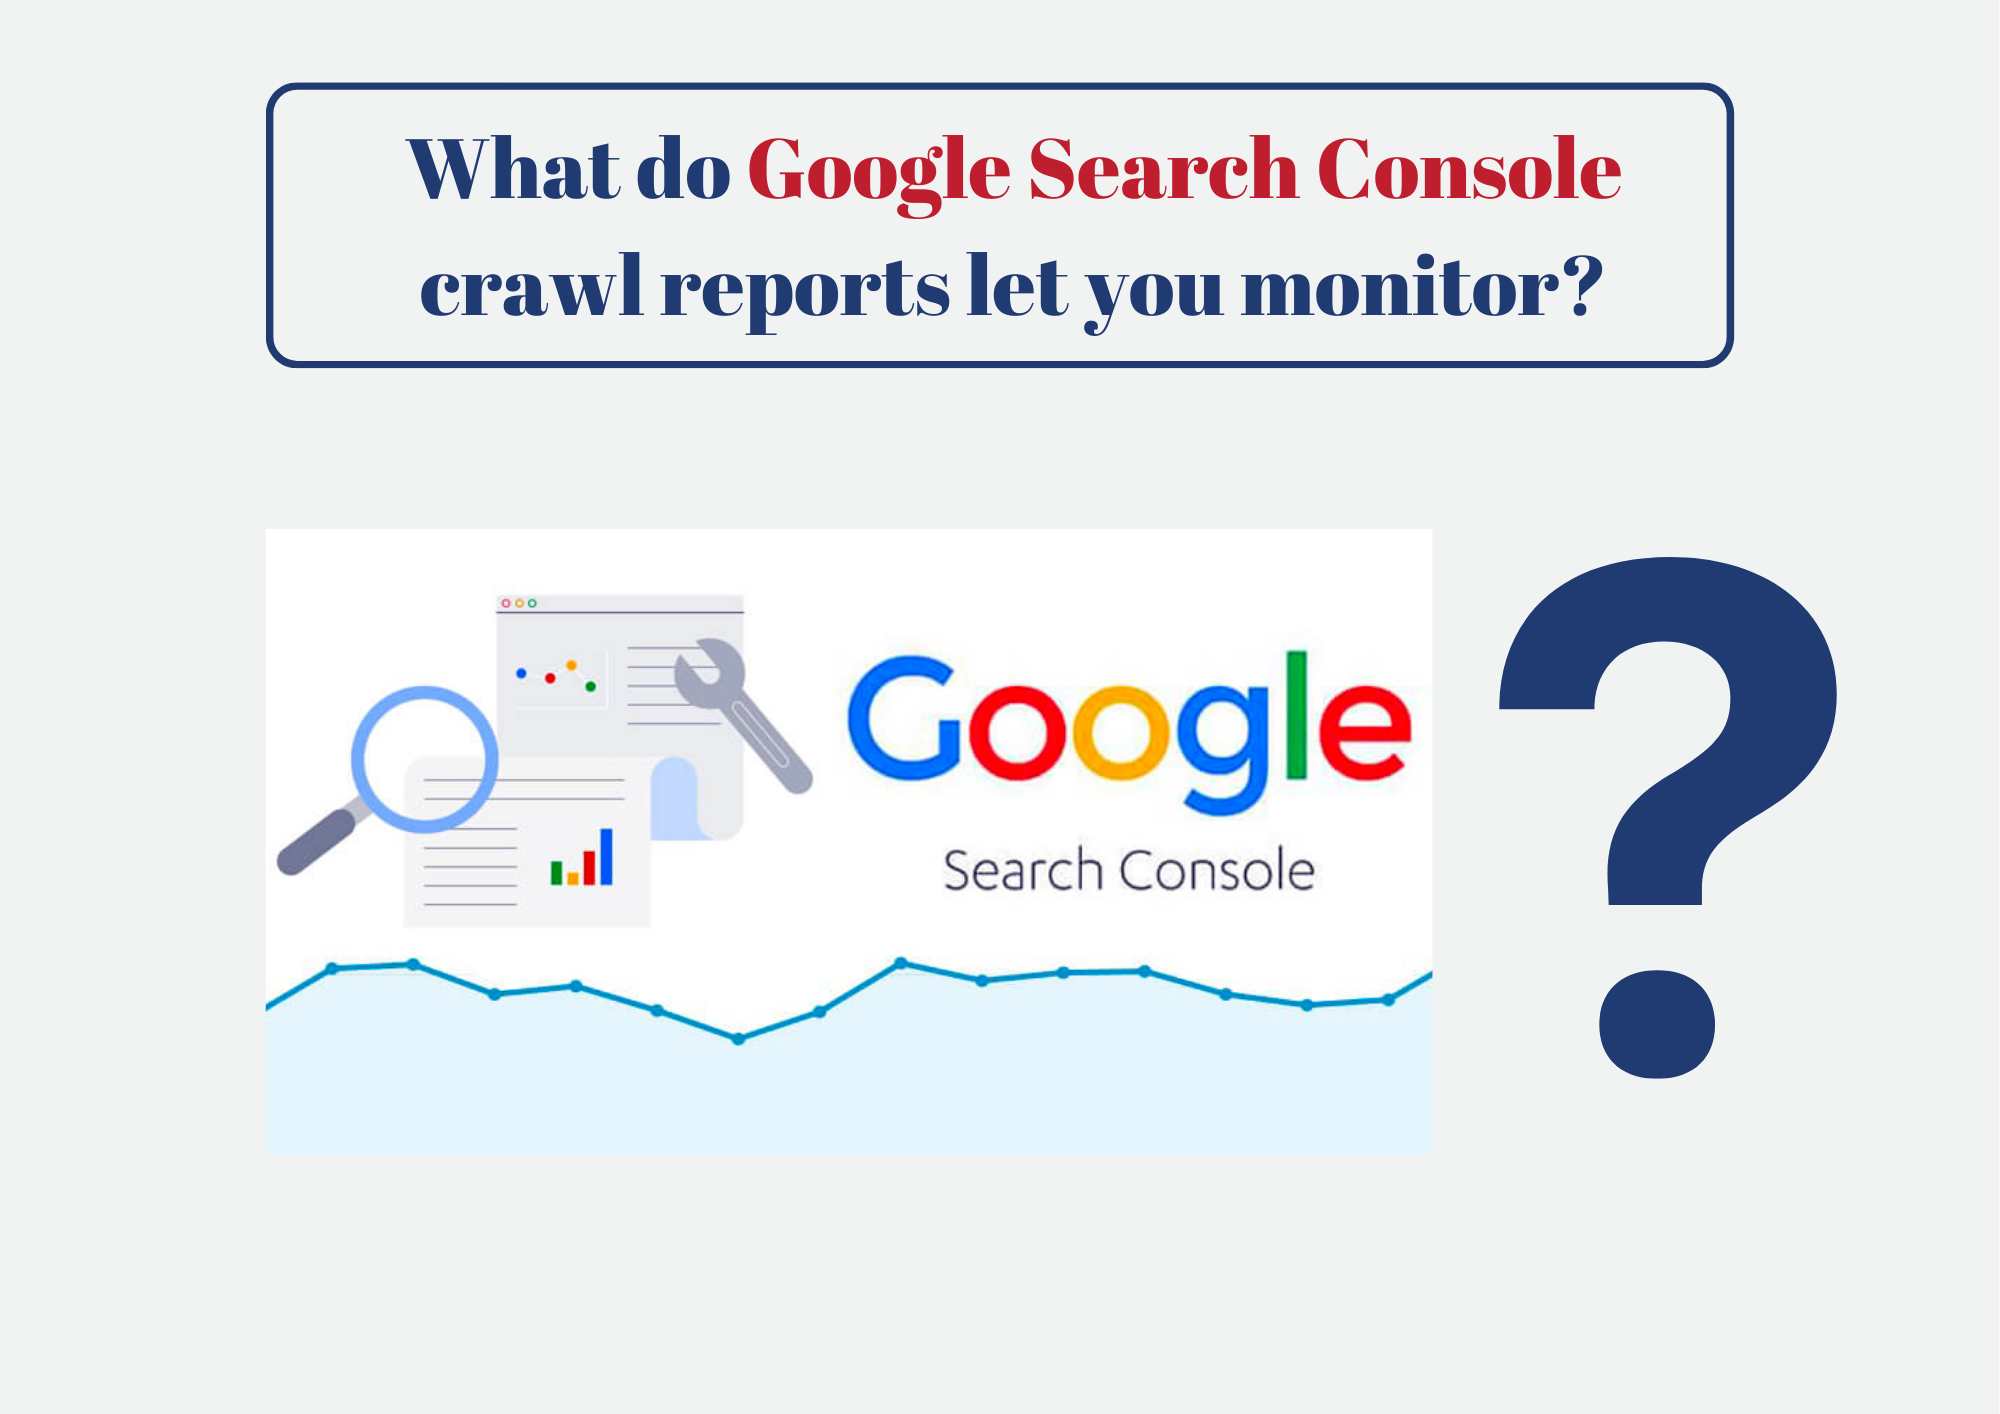 What do Google Search Console crawl reports let you monitor